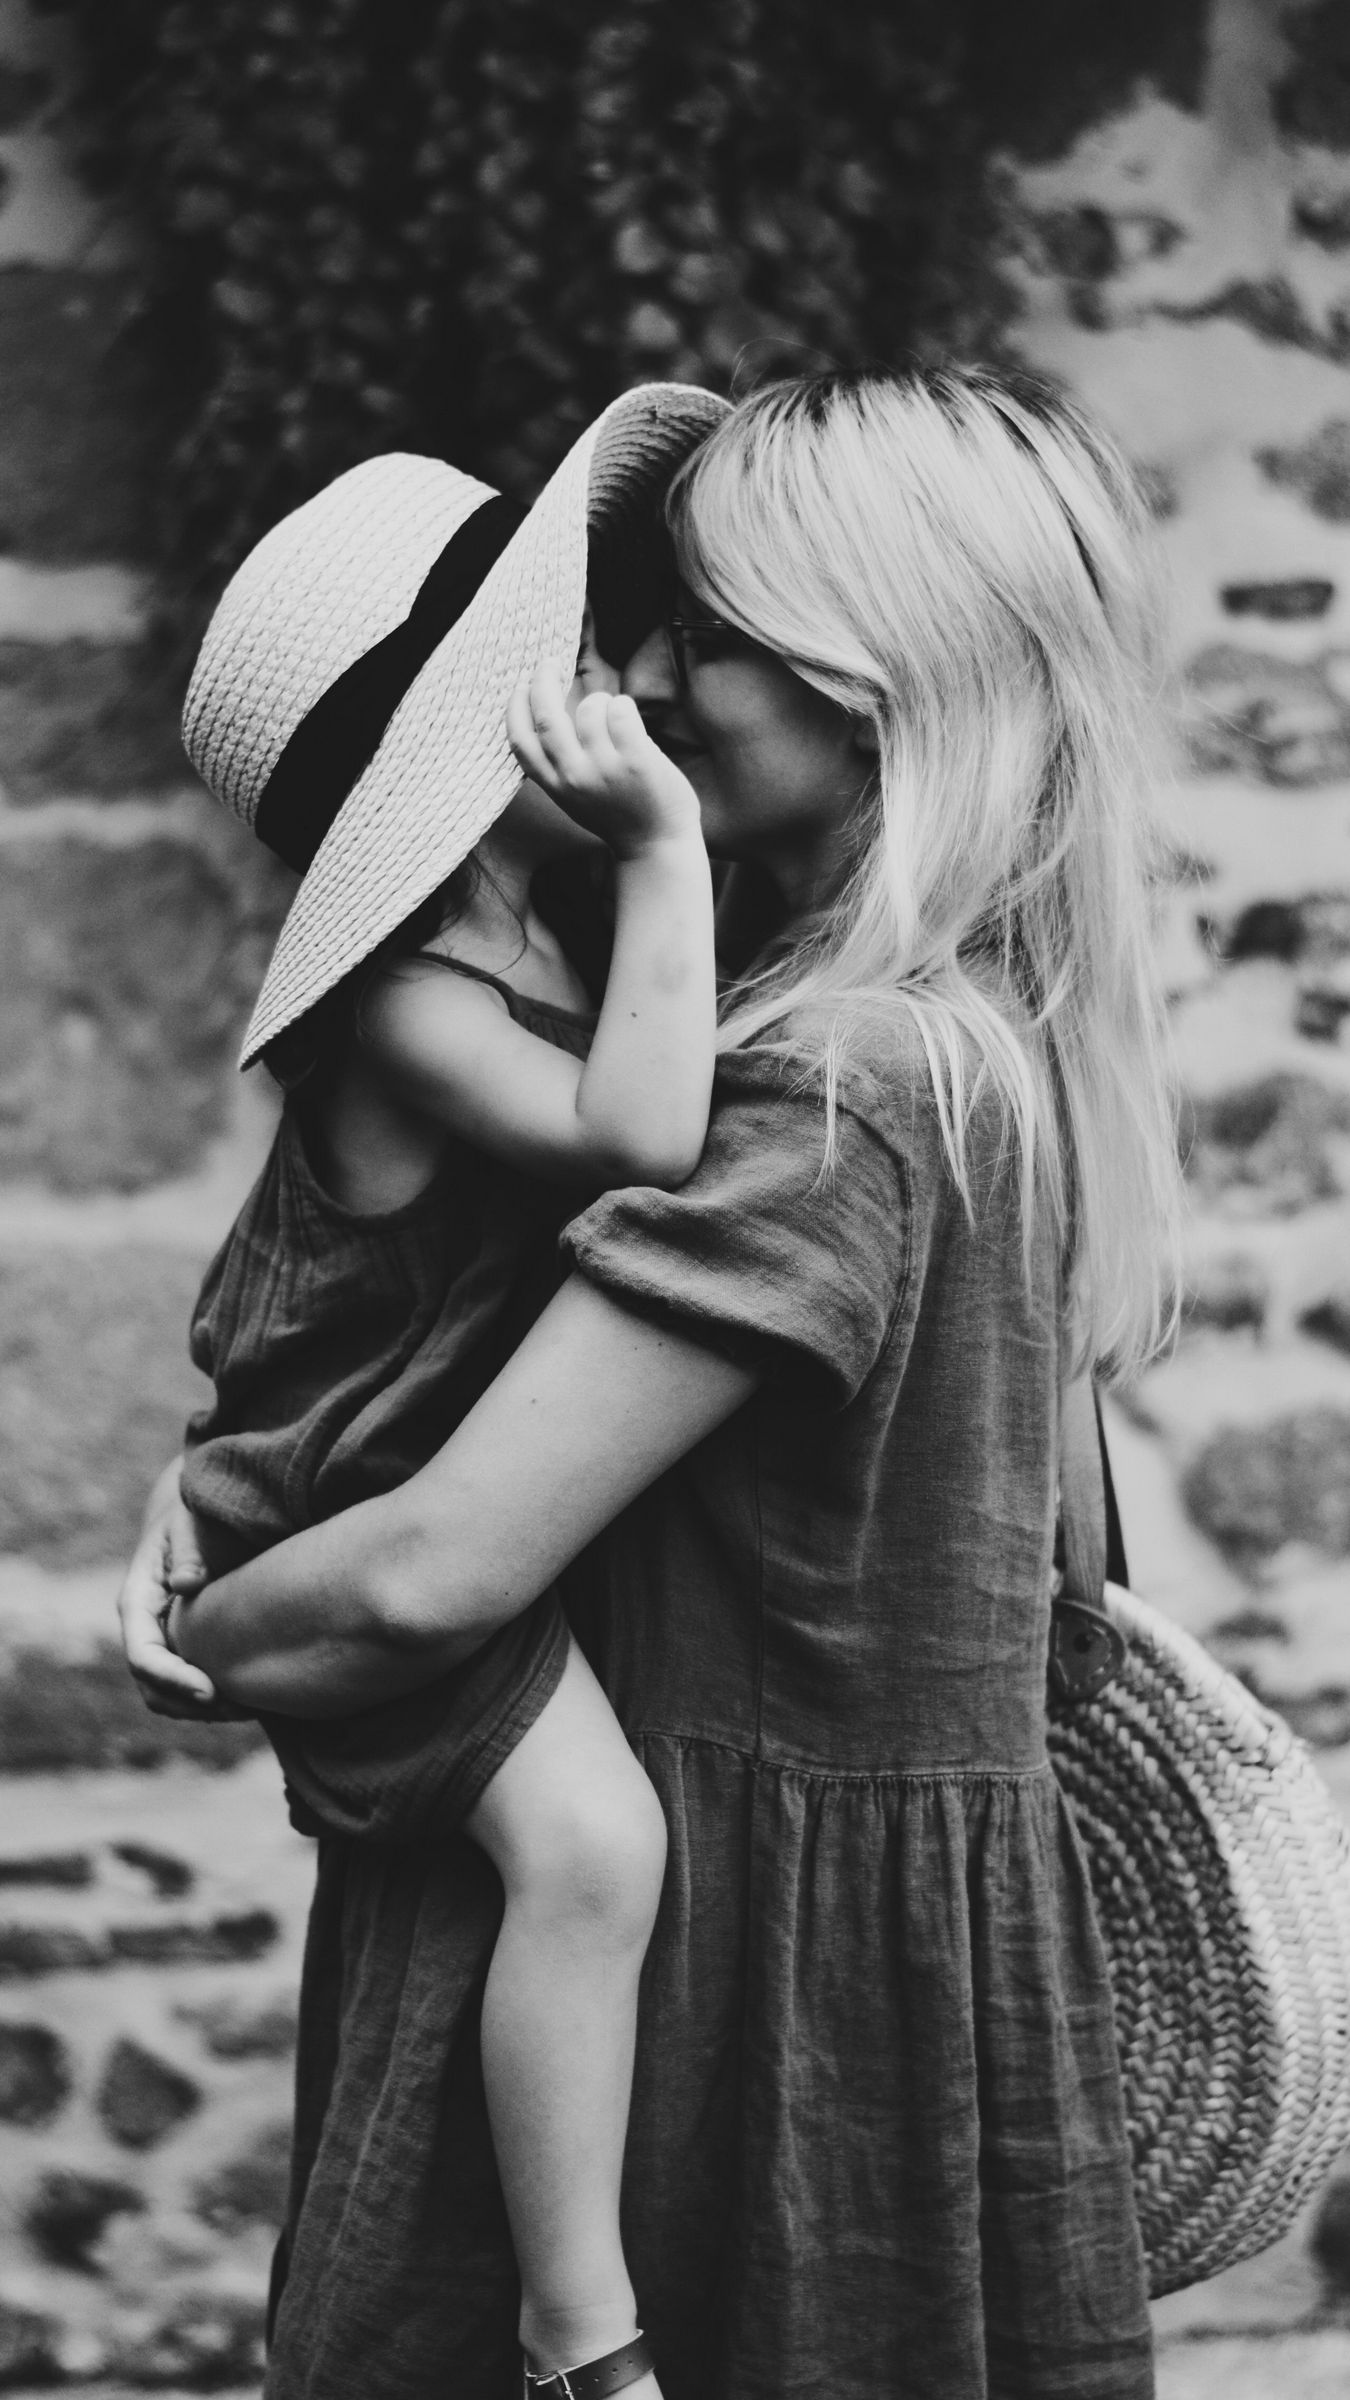 Download wallpaper 1350x2400 mother, child, bw, family, hug, tenderness, hat iphone 8+/7+/6s+/for parallax HD background